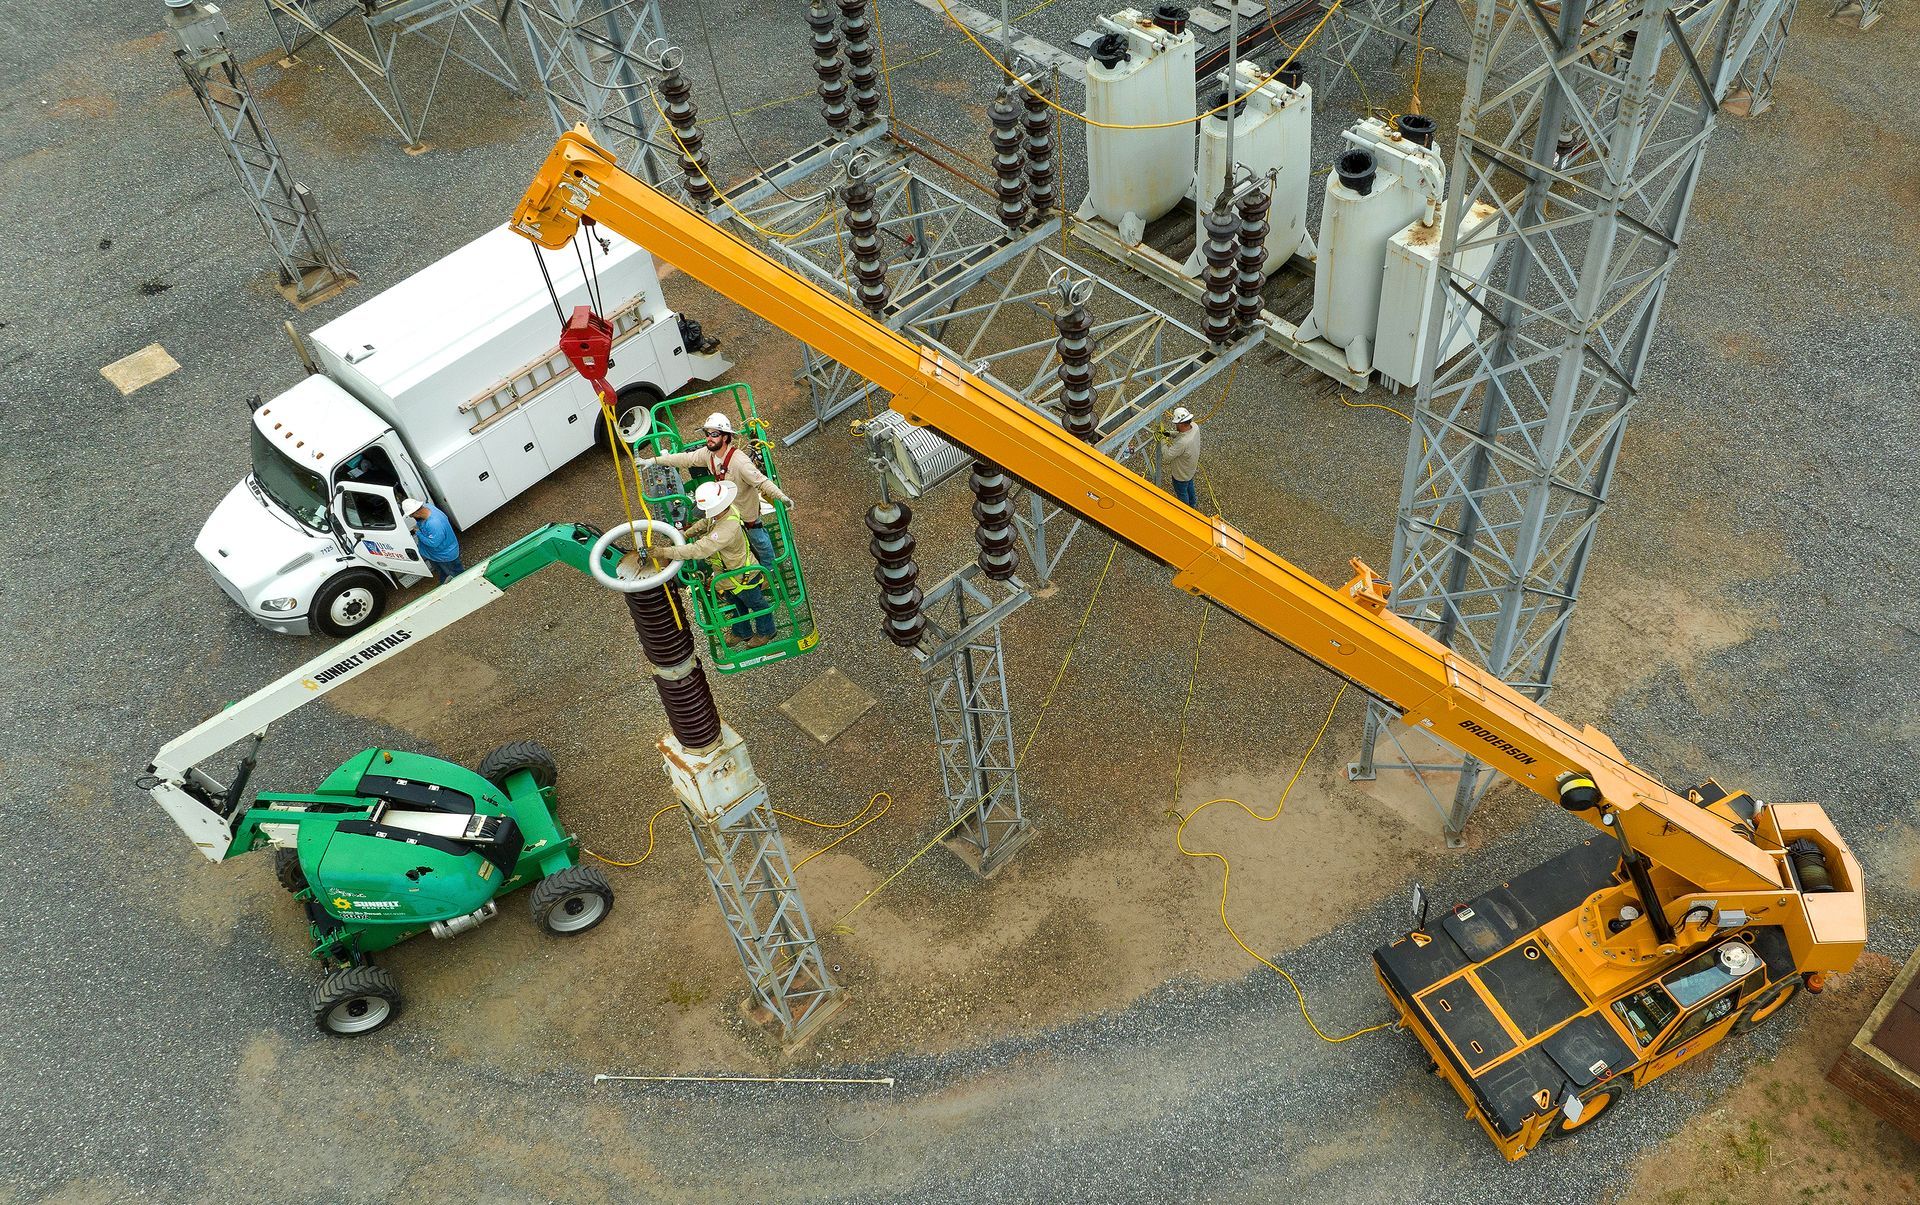 Utility workers standing on a lift about 20 feet above the ground install high-energy power lines. The photo was taken using a drone and the image looks down on the utility workers. 